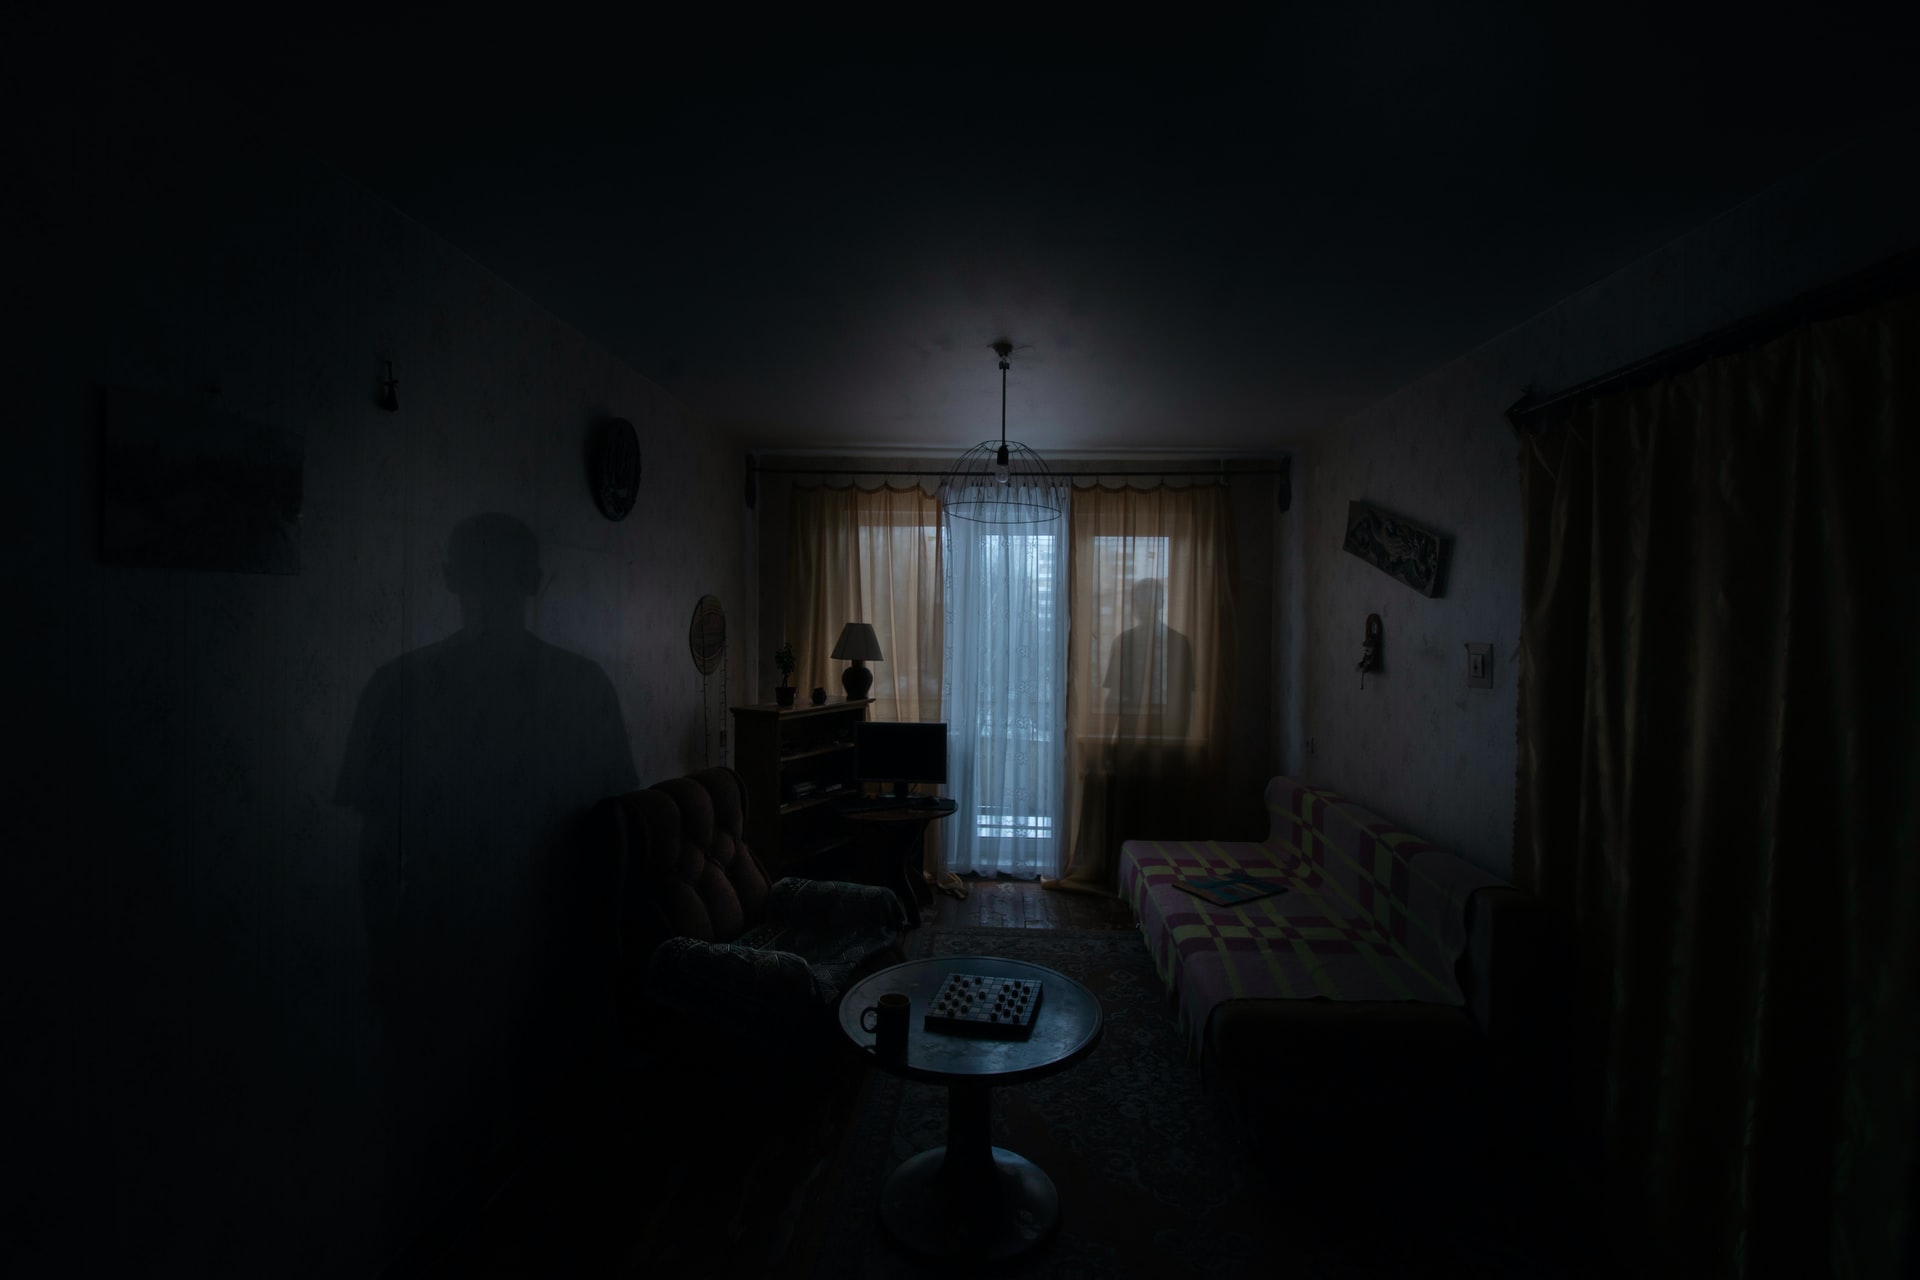 A dark living room with eerie silhouettes.